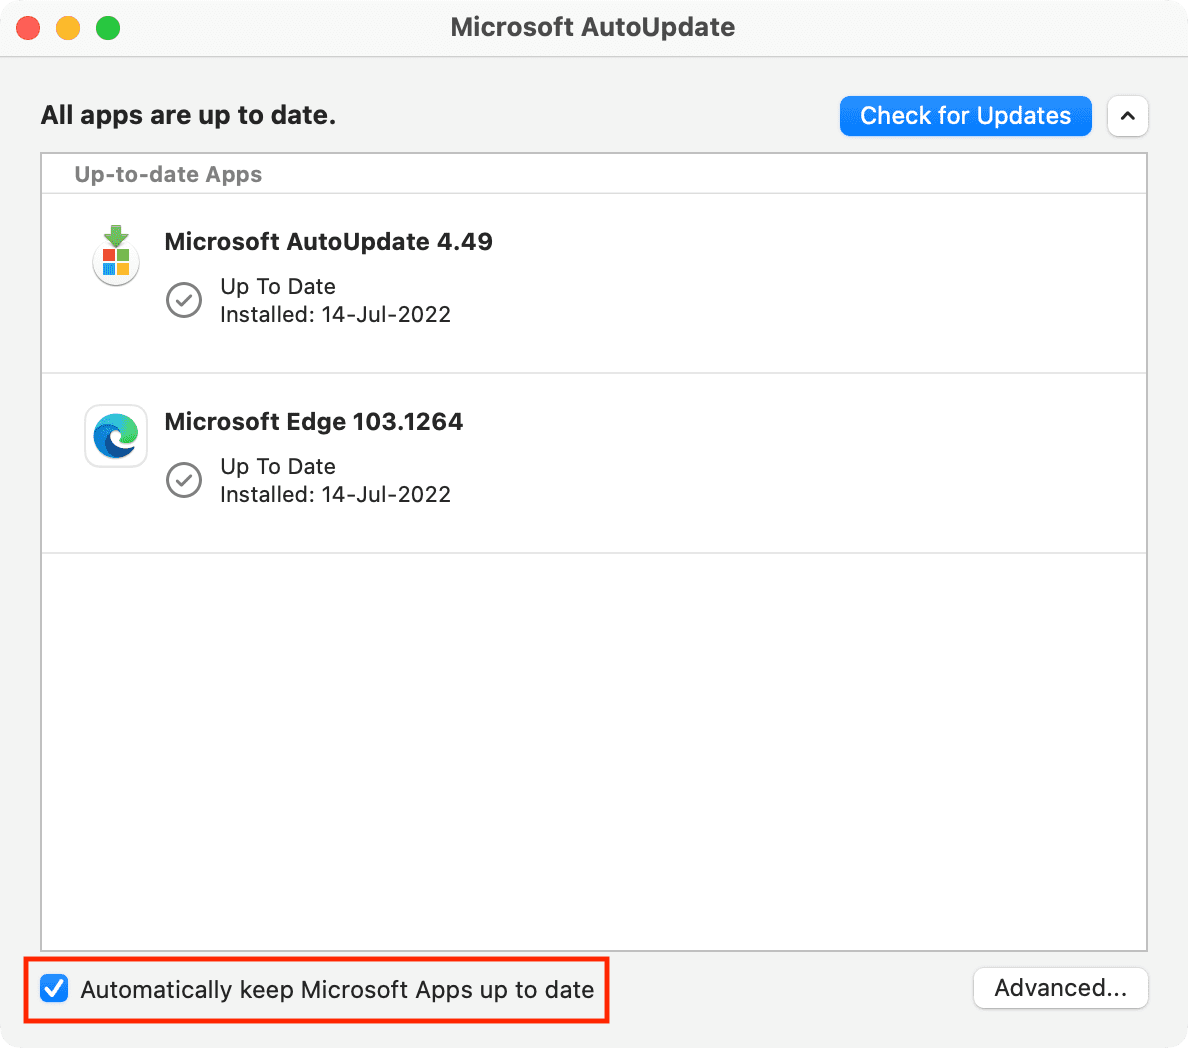 Automatically keep Microsoft Apps up to date on Mac using the AutoUpdate tool